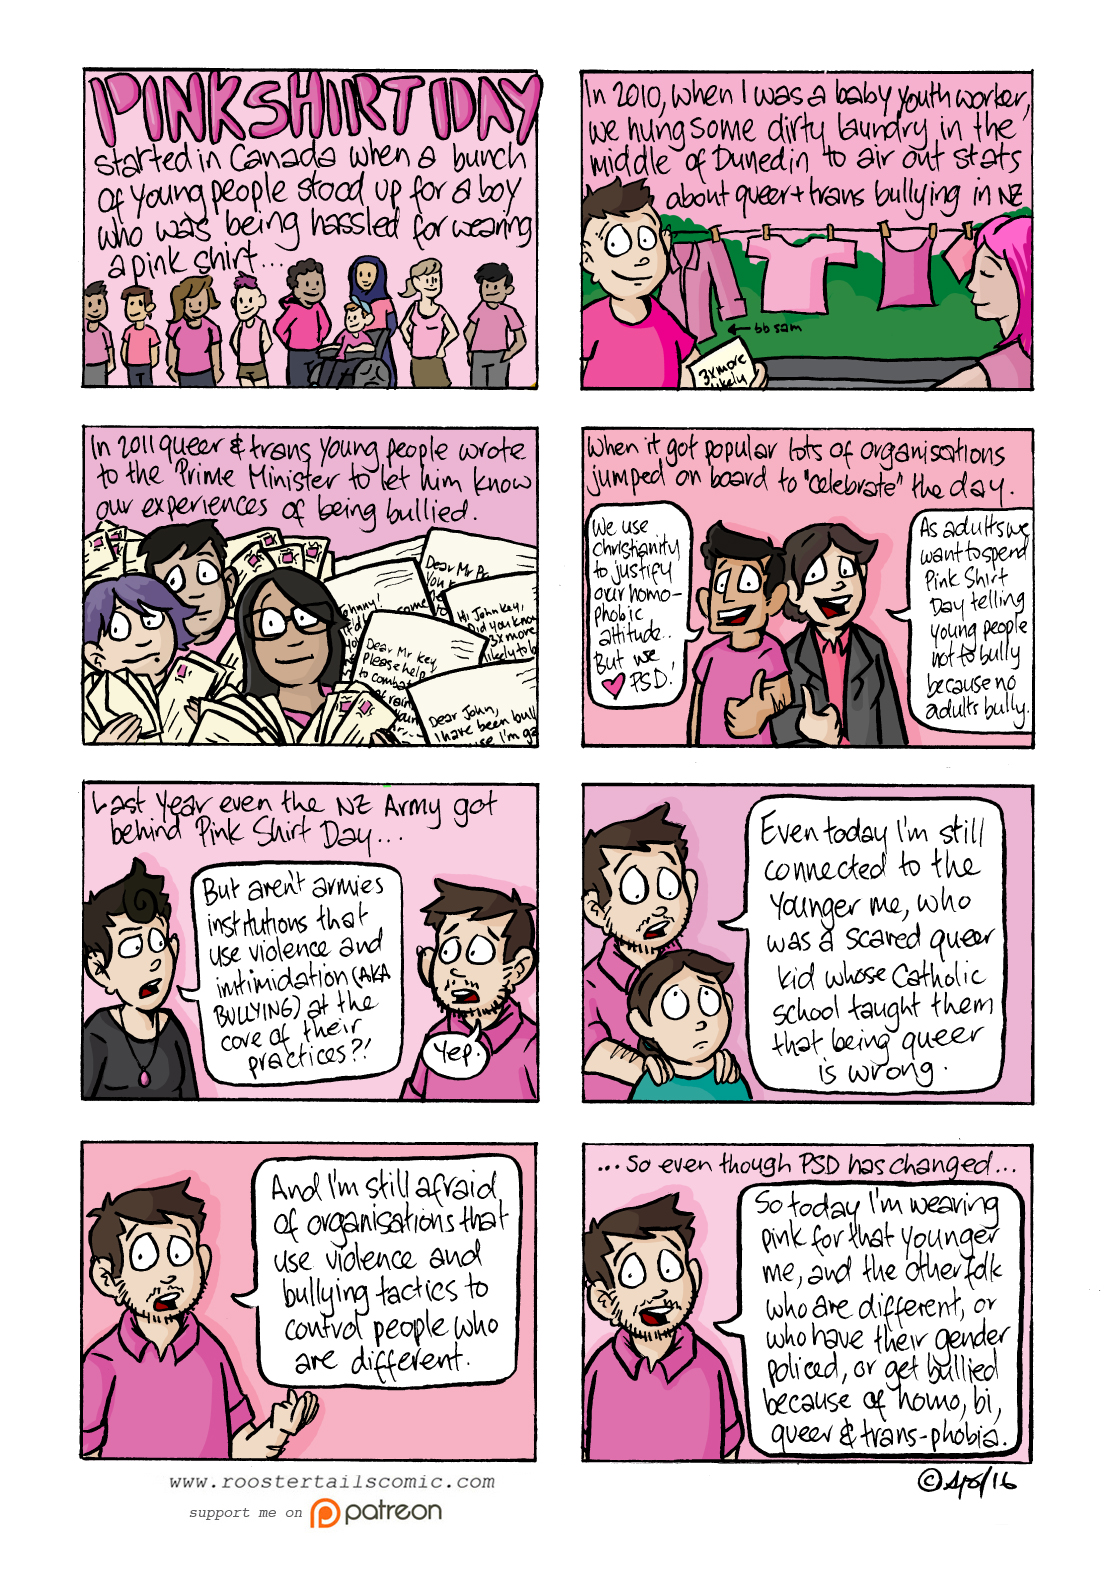 This comic is VERY pink